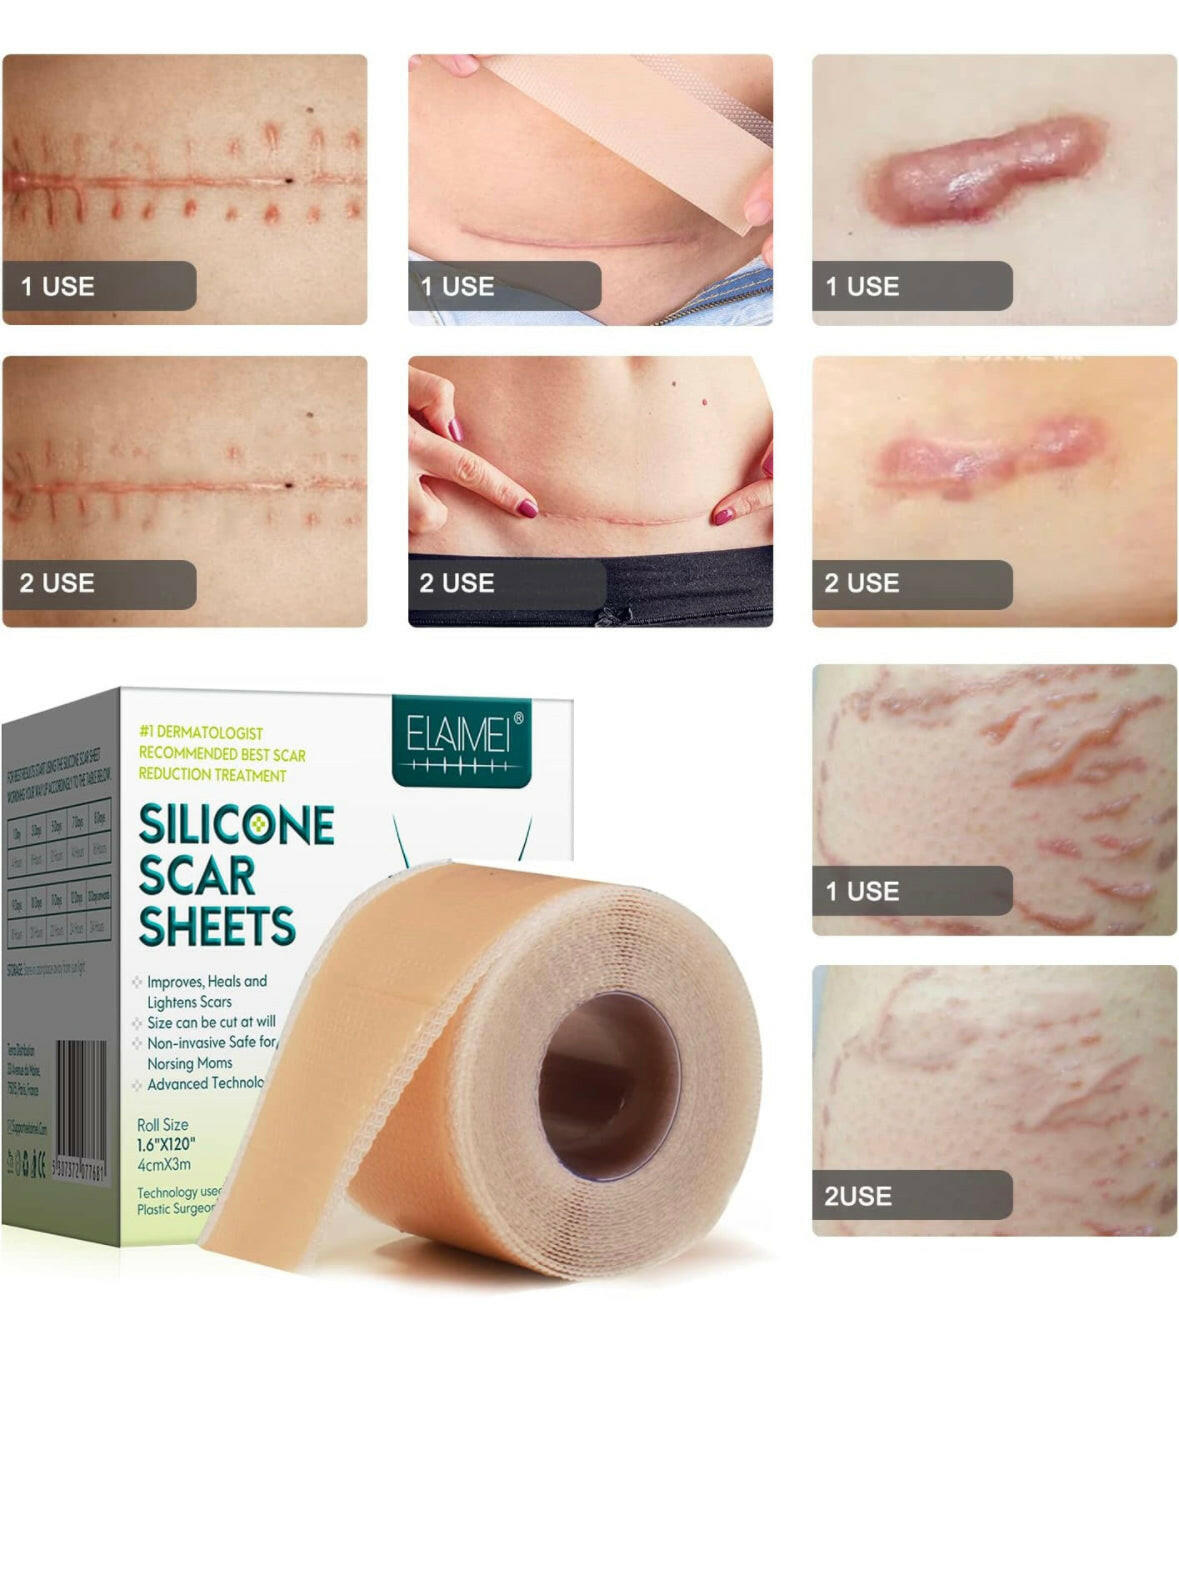 Silicone Scar Sheets (1.6” x 120” Roll-3M).